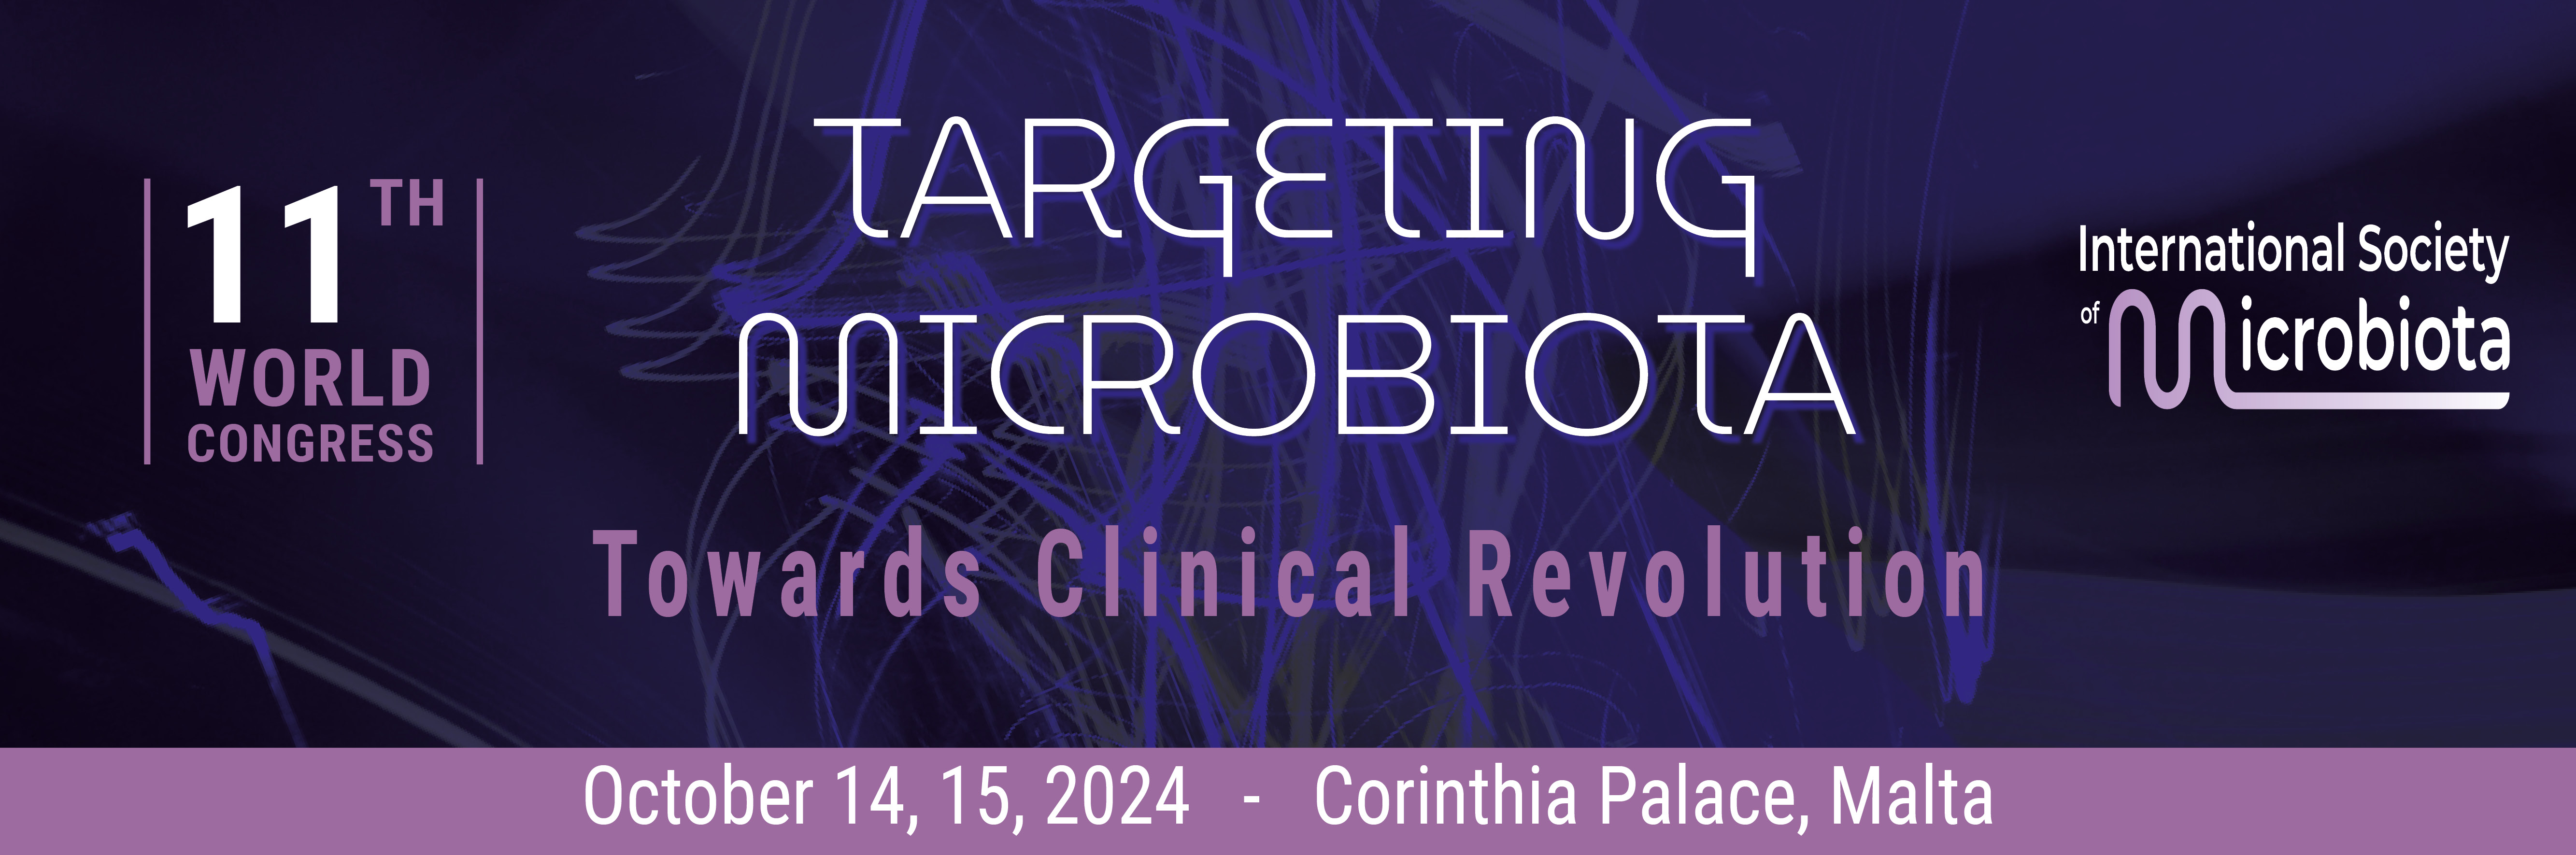 11th World Congress on Targeting Microbiota will be held on October 14-15, 2024 in Malta